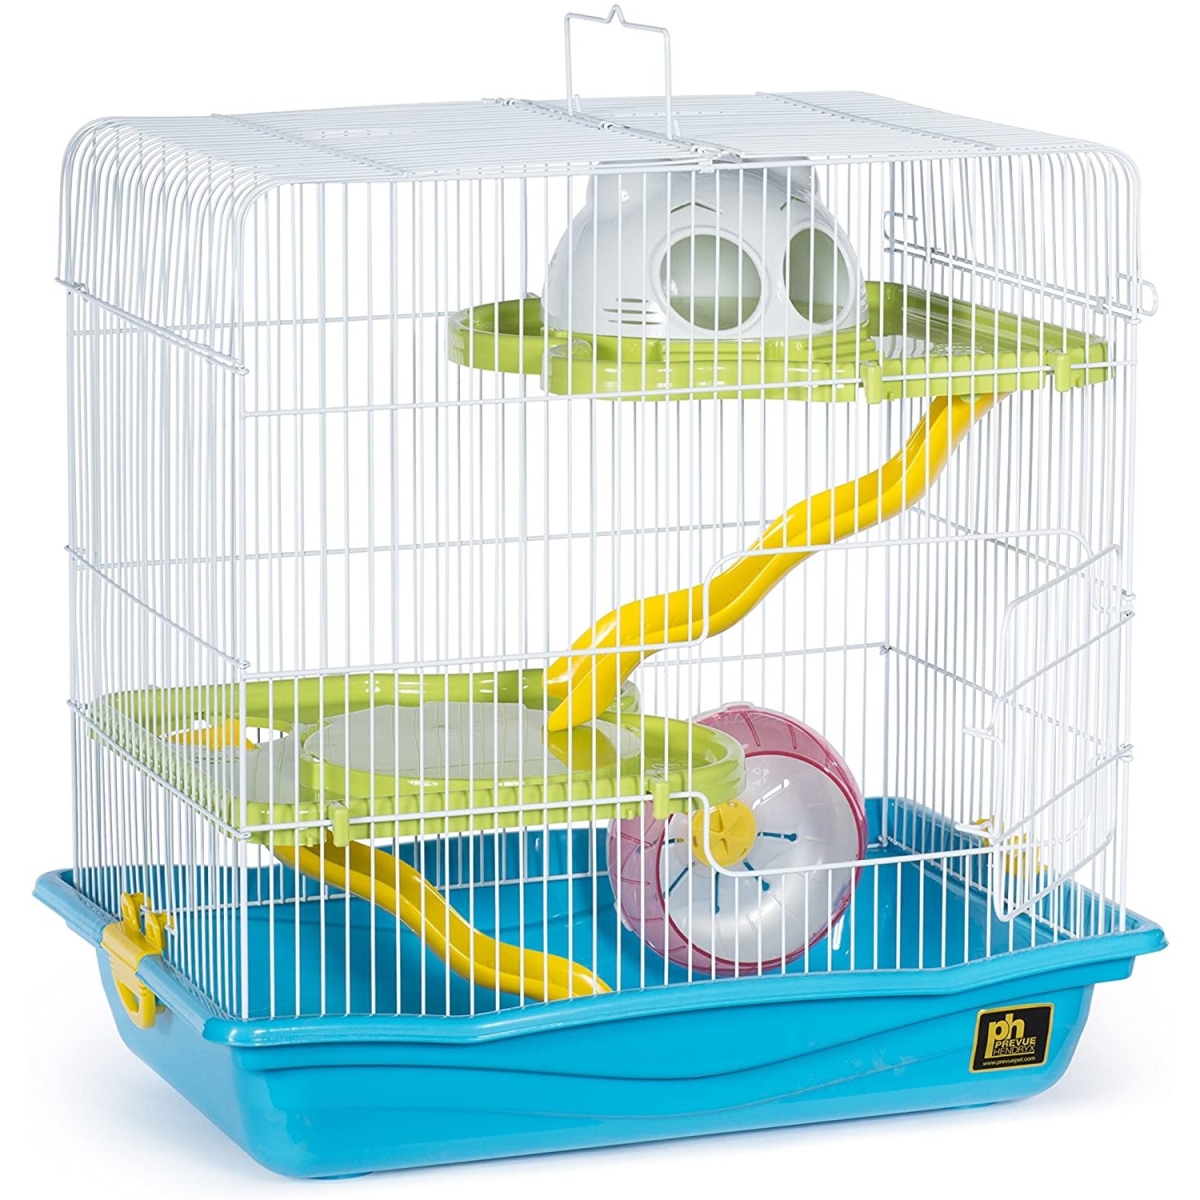 Picture of Prevue Pet Products PP-SP2004-BL Hamster Haven Cage, Blue - Medium